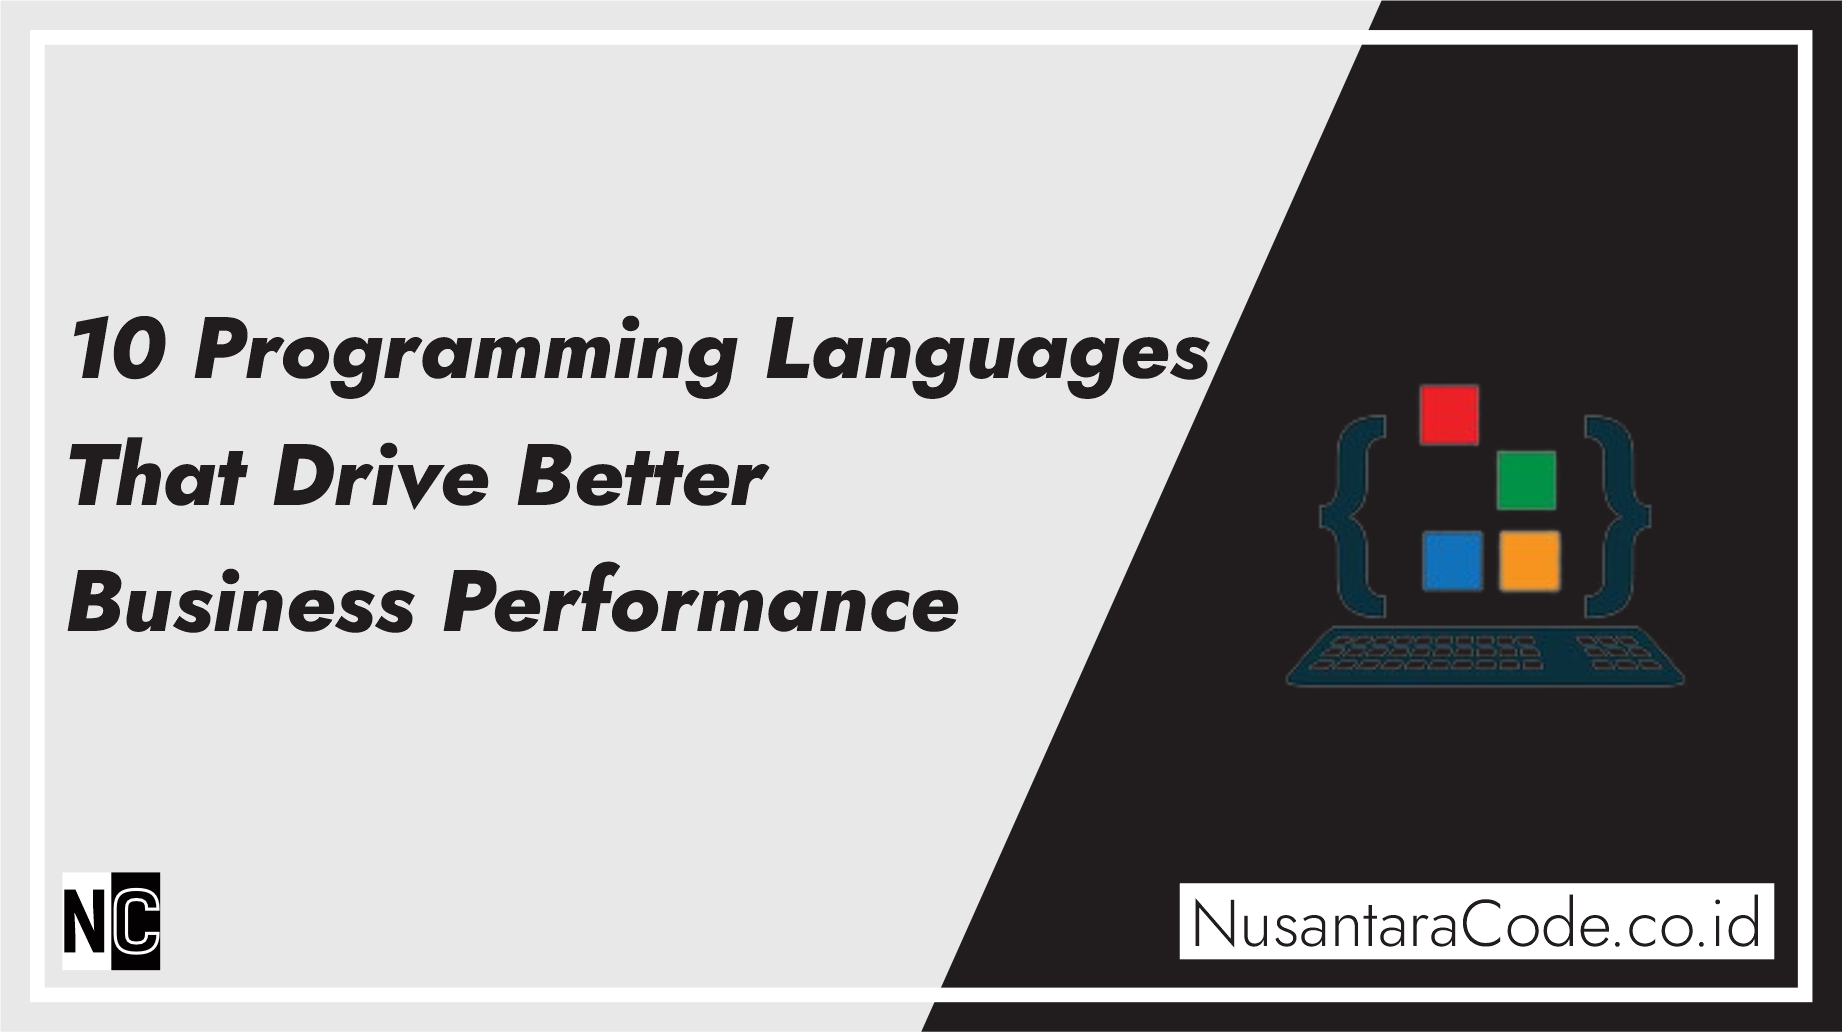 10 Programming Languages That Drive Better Business Performance